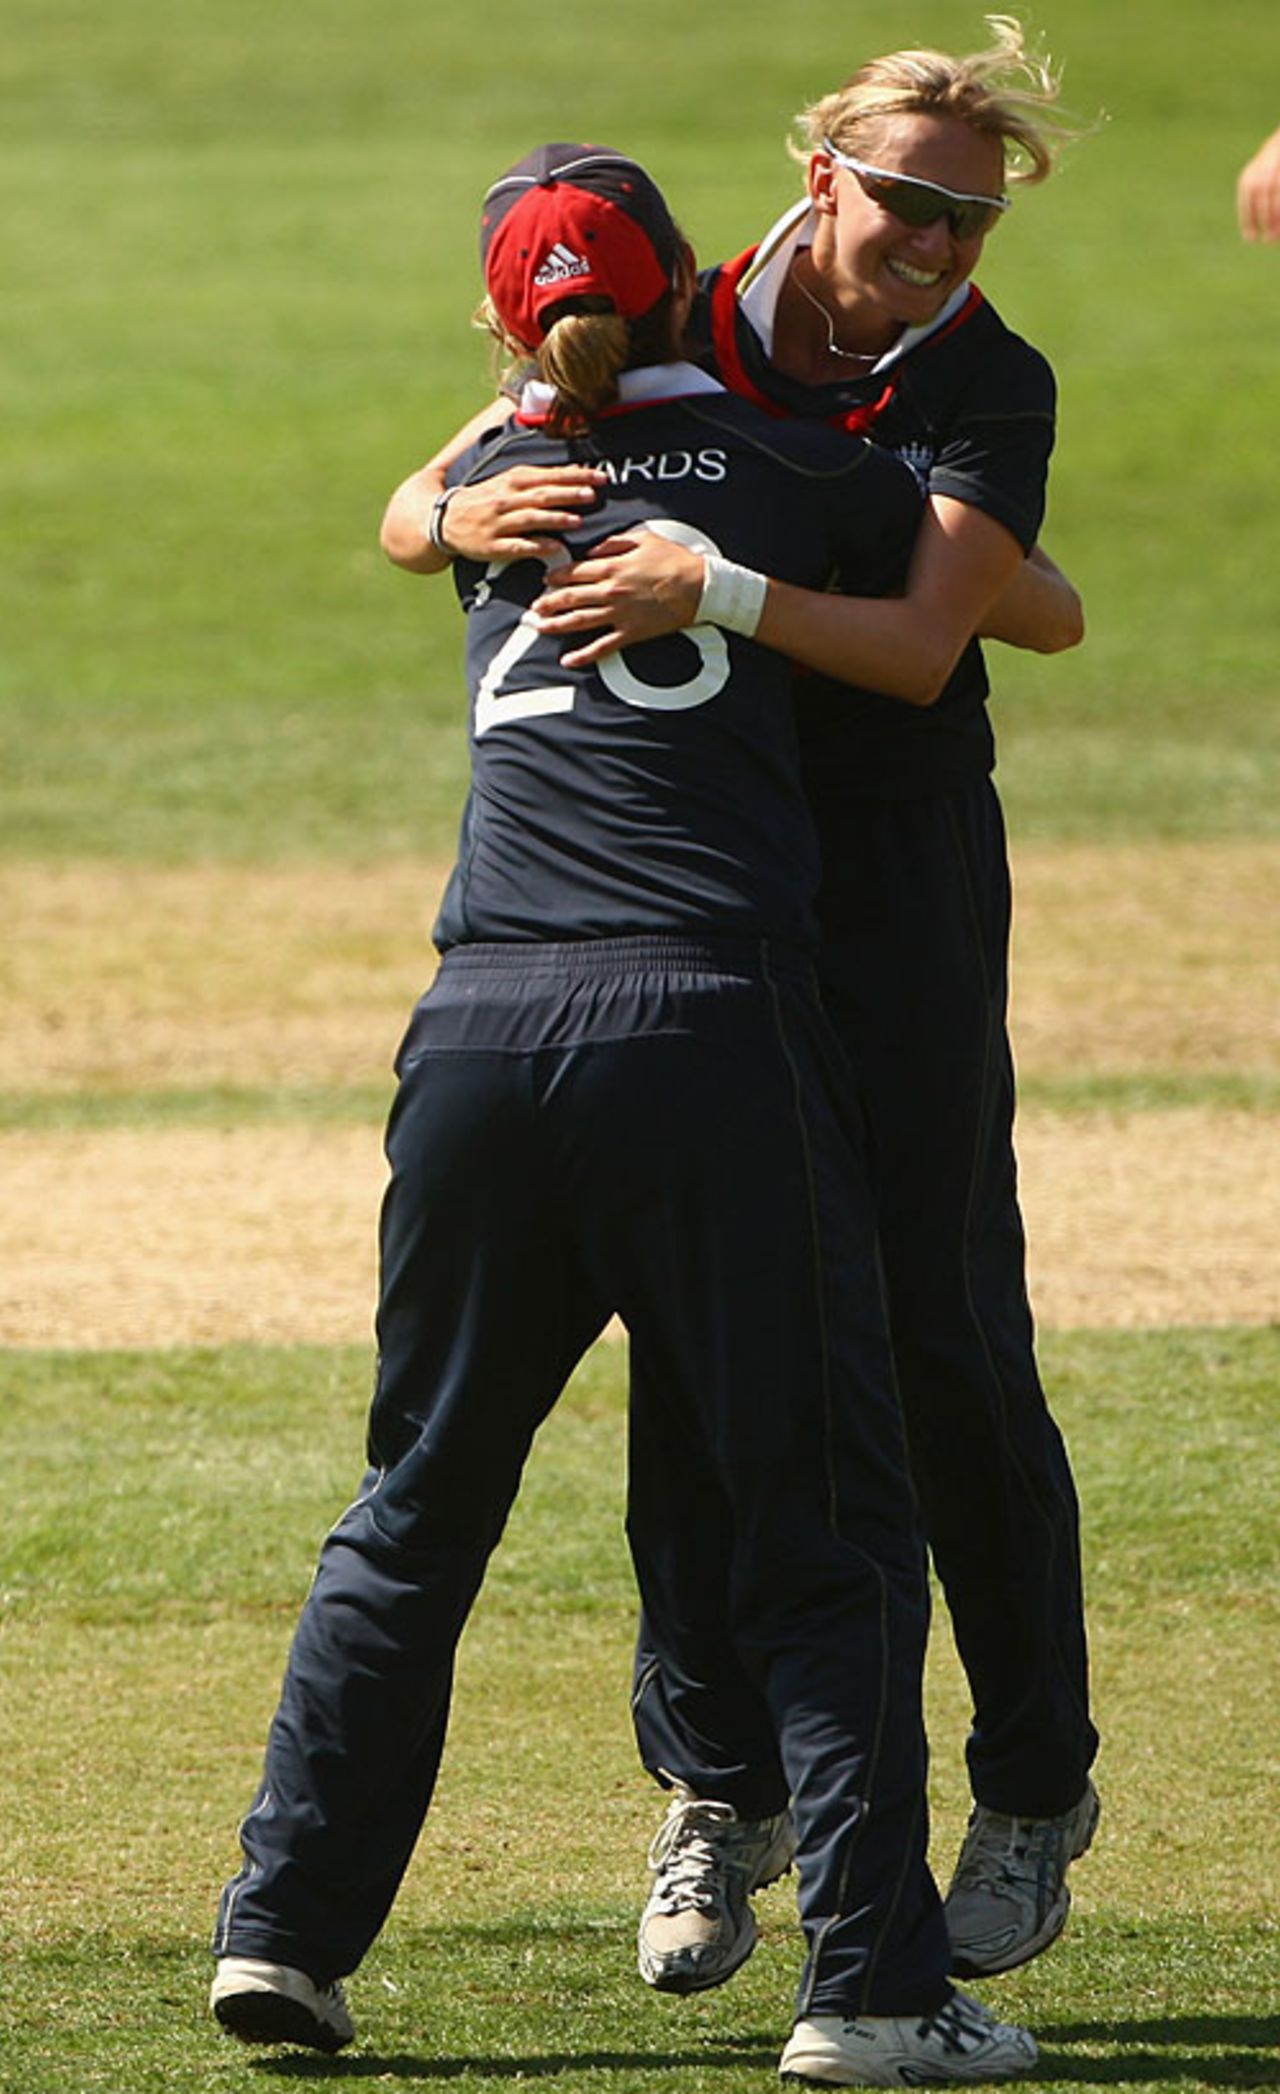 Laura Marsh is delighted after dismissing Aimee Mason, England v New Zealand, women's World Cup final, Sydney, March 22, 2009